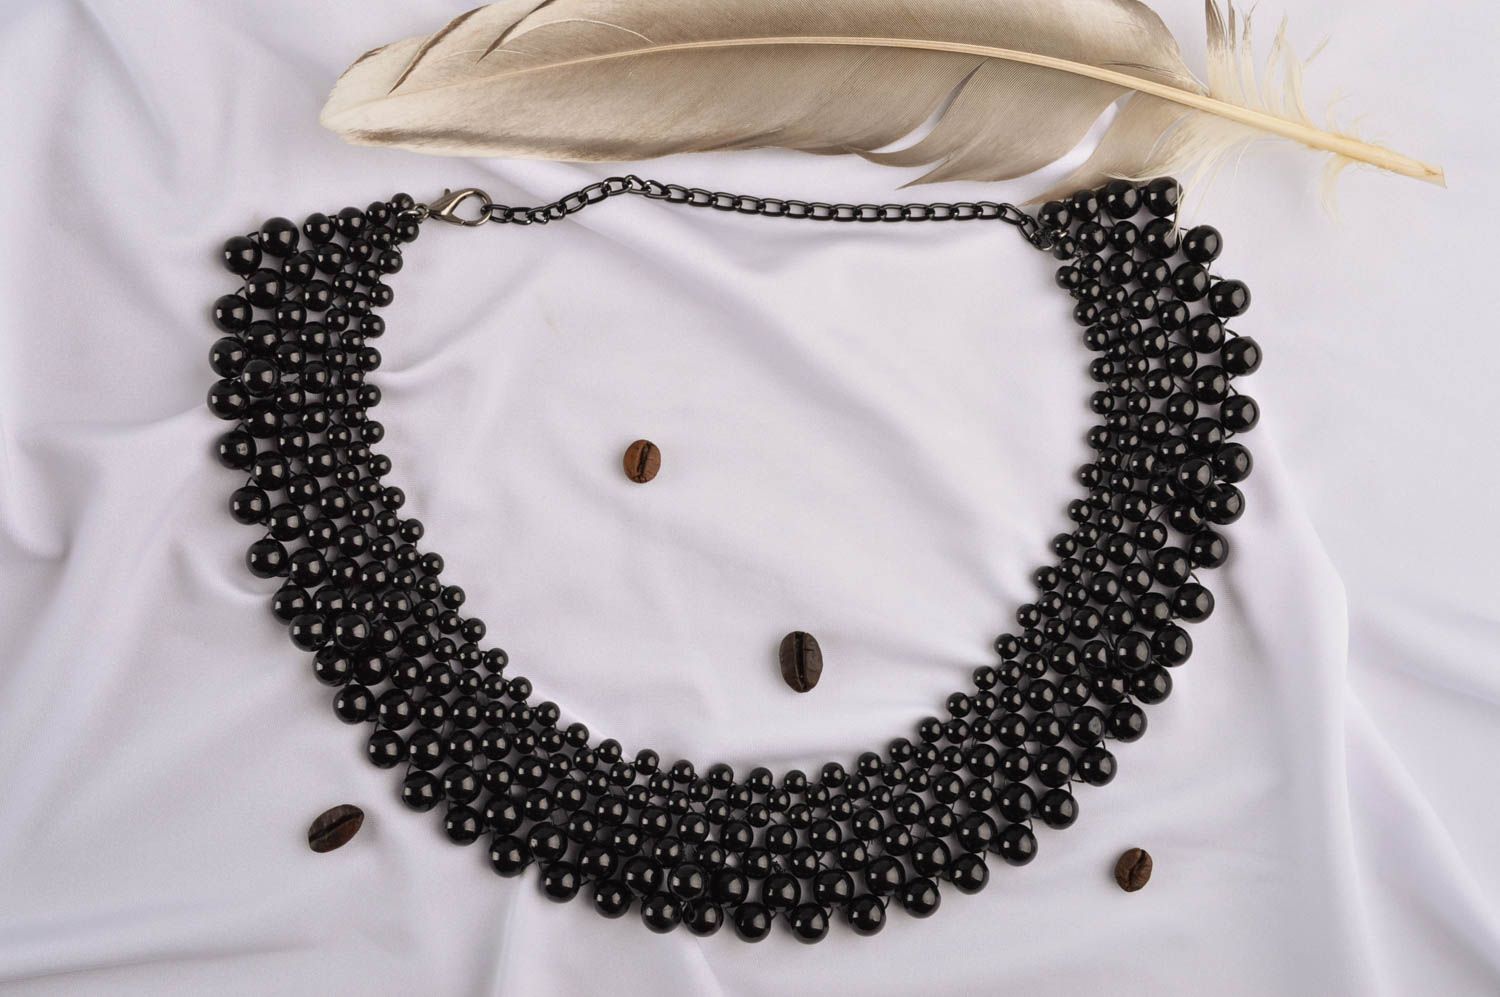 Handmade necklace beaded necklace designer jewelry fashion accessories photo 1